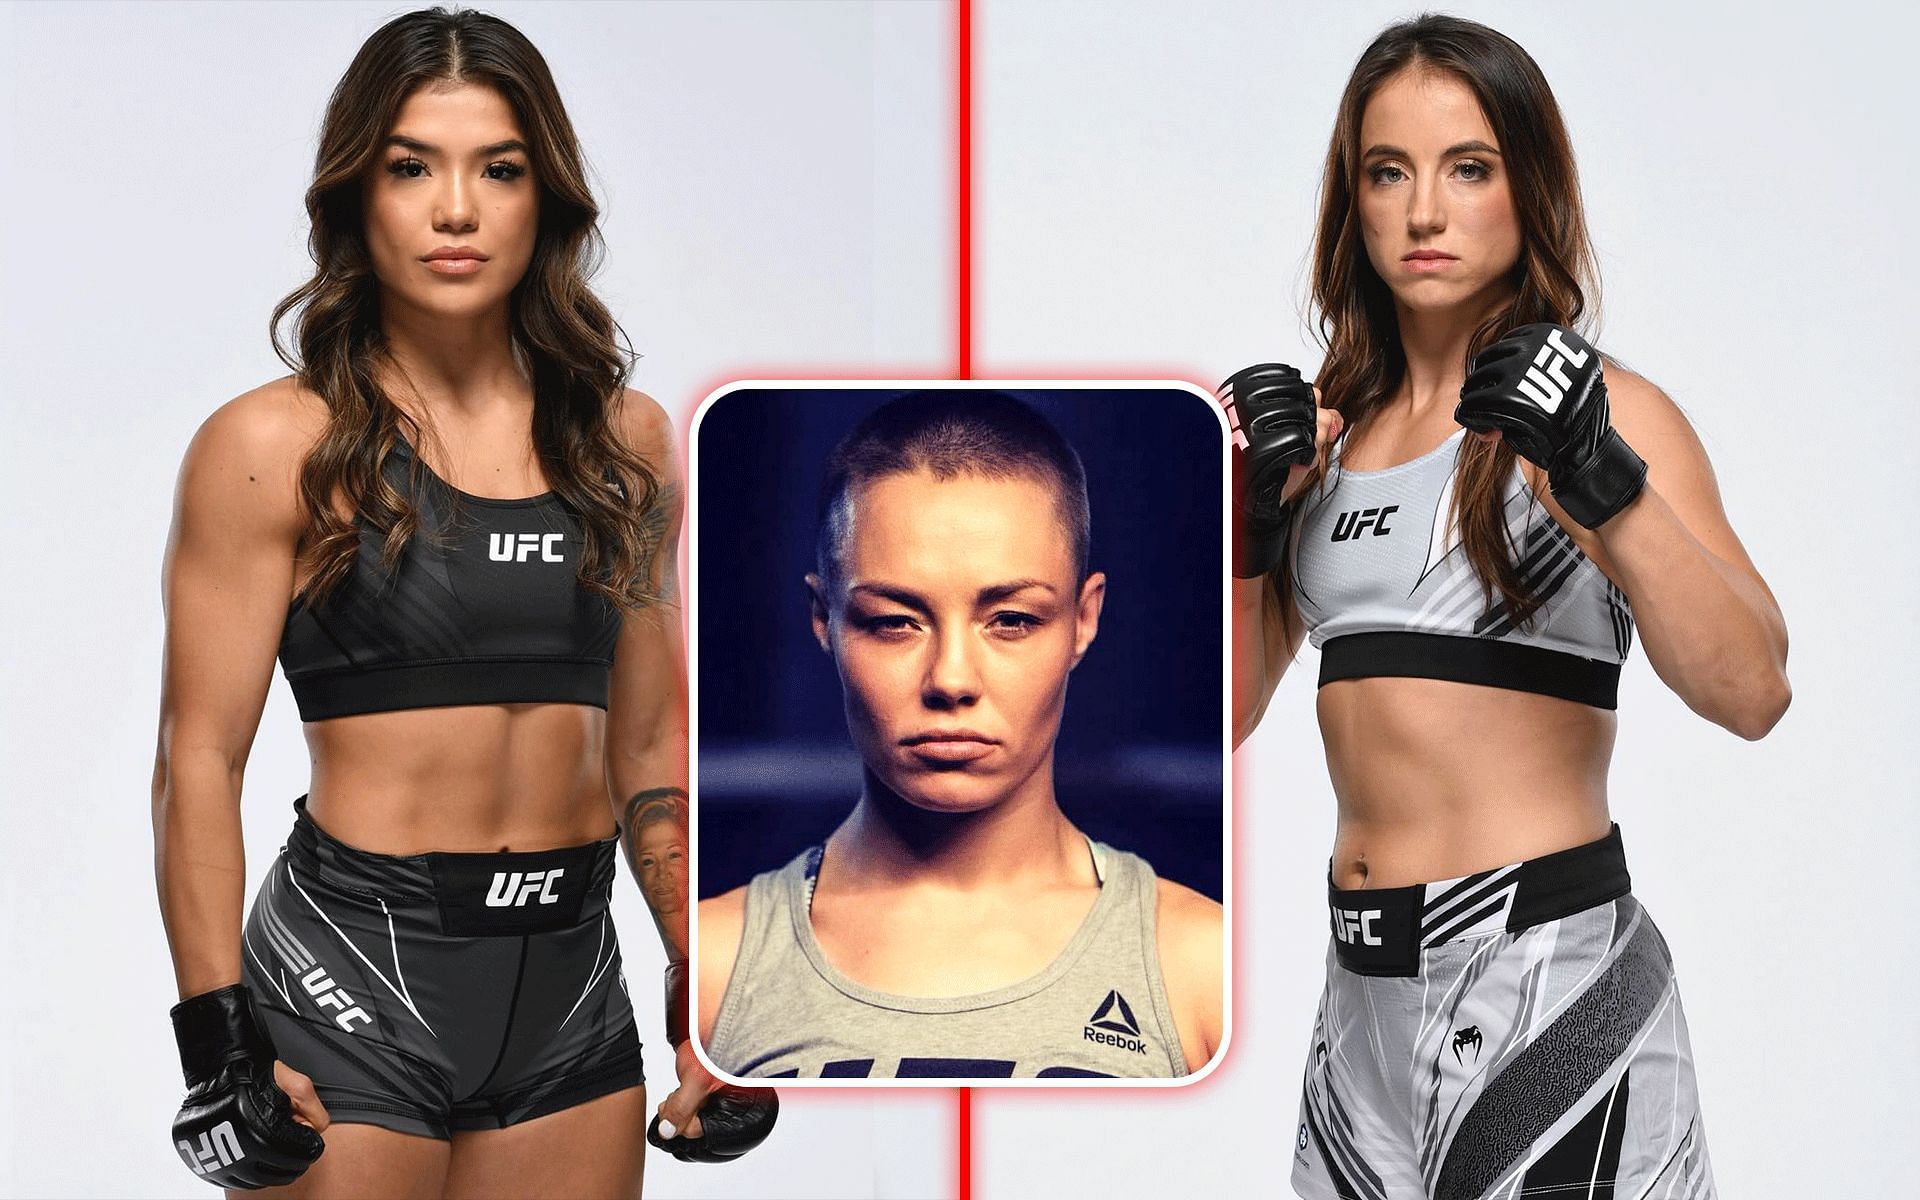 Tracy Cortez (left) expected to replace Maycee Barber (right) in her fight against Rose Namajunas (inset) [Images courtesy: @rosenamajunas, @mayceebarber and @cortezmma on Instagram]